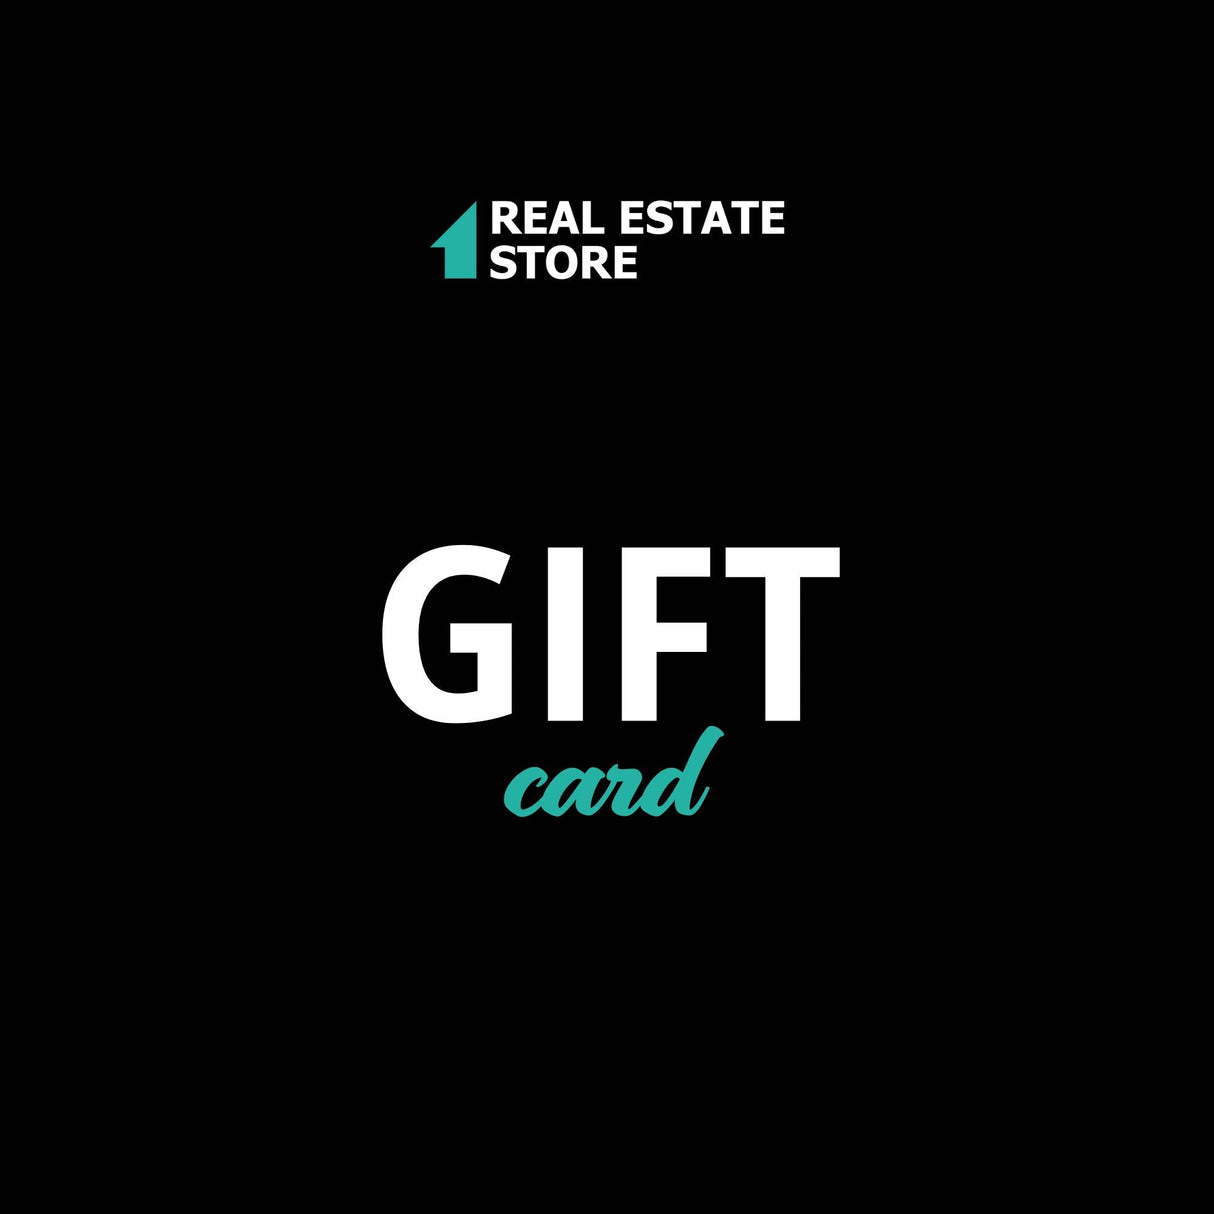 Real Estate Store Gift Card - Real Estate Store